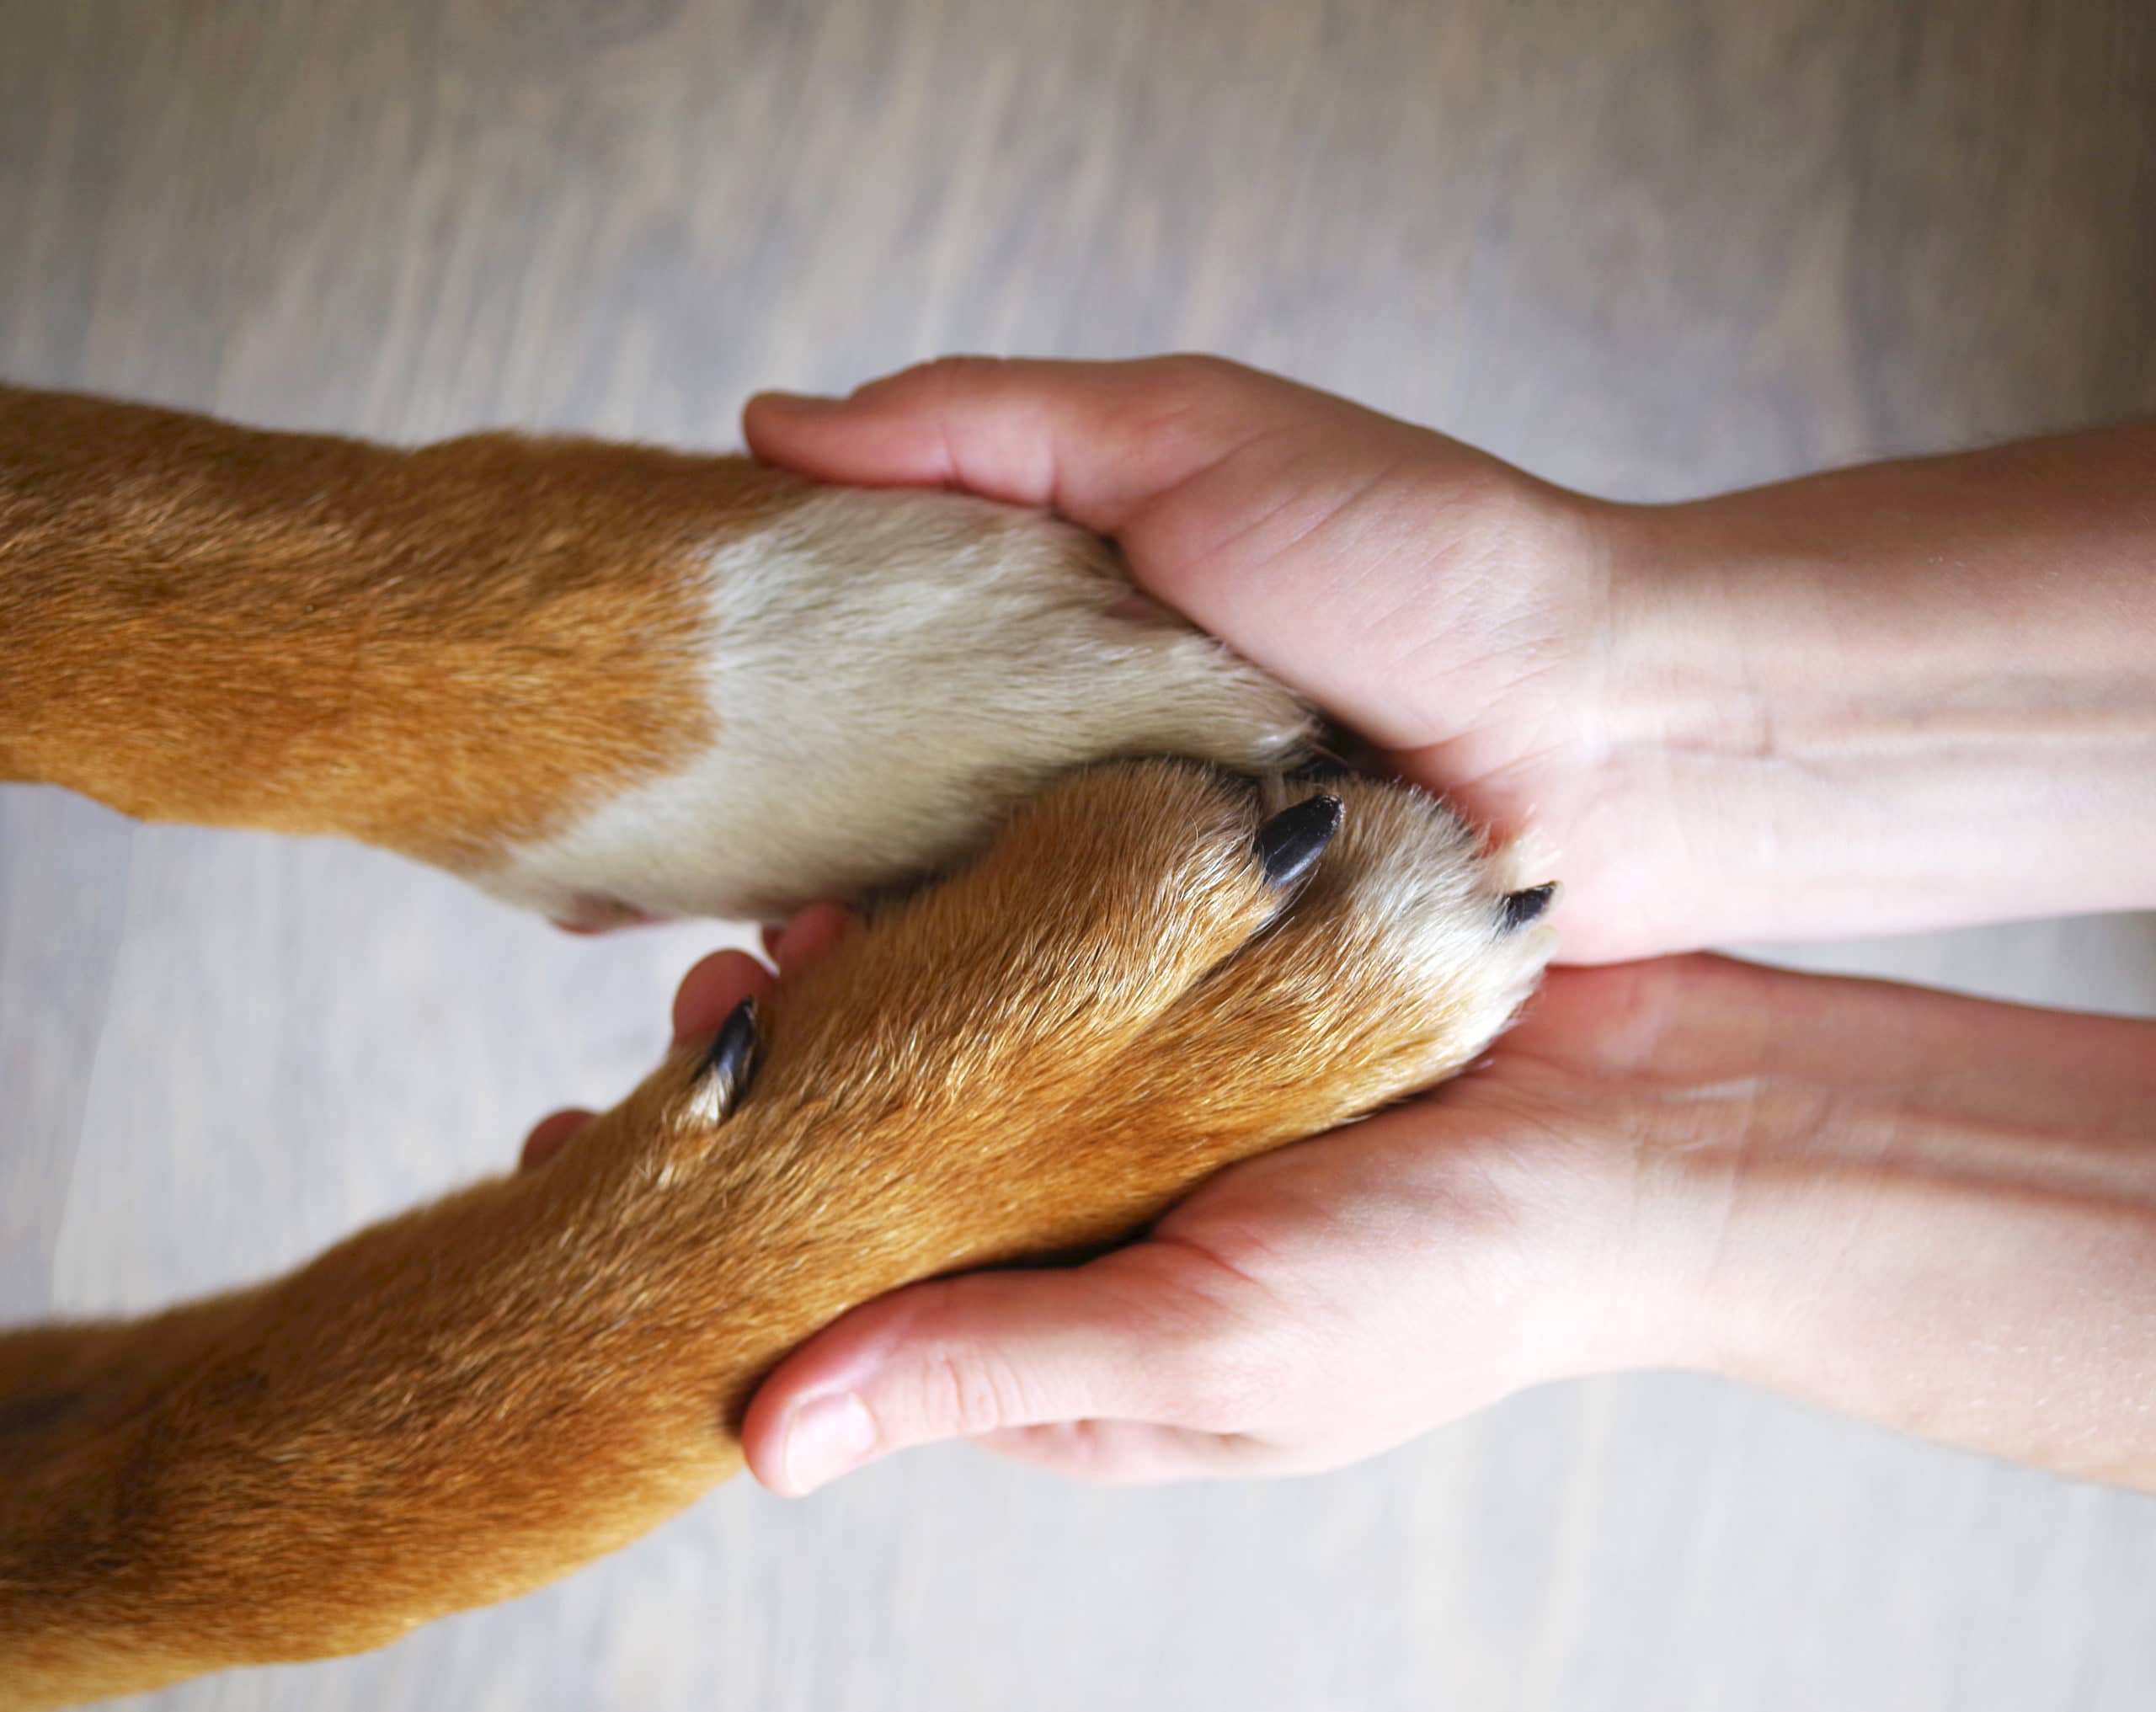 Dog paws and human hand close up, top view. Conceptual image of